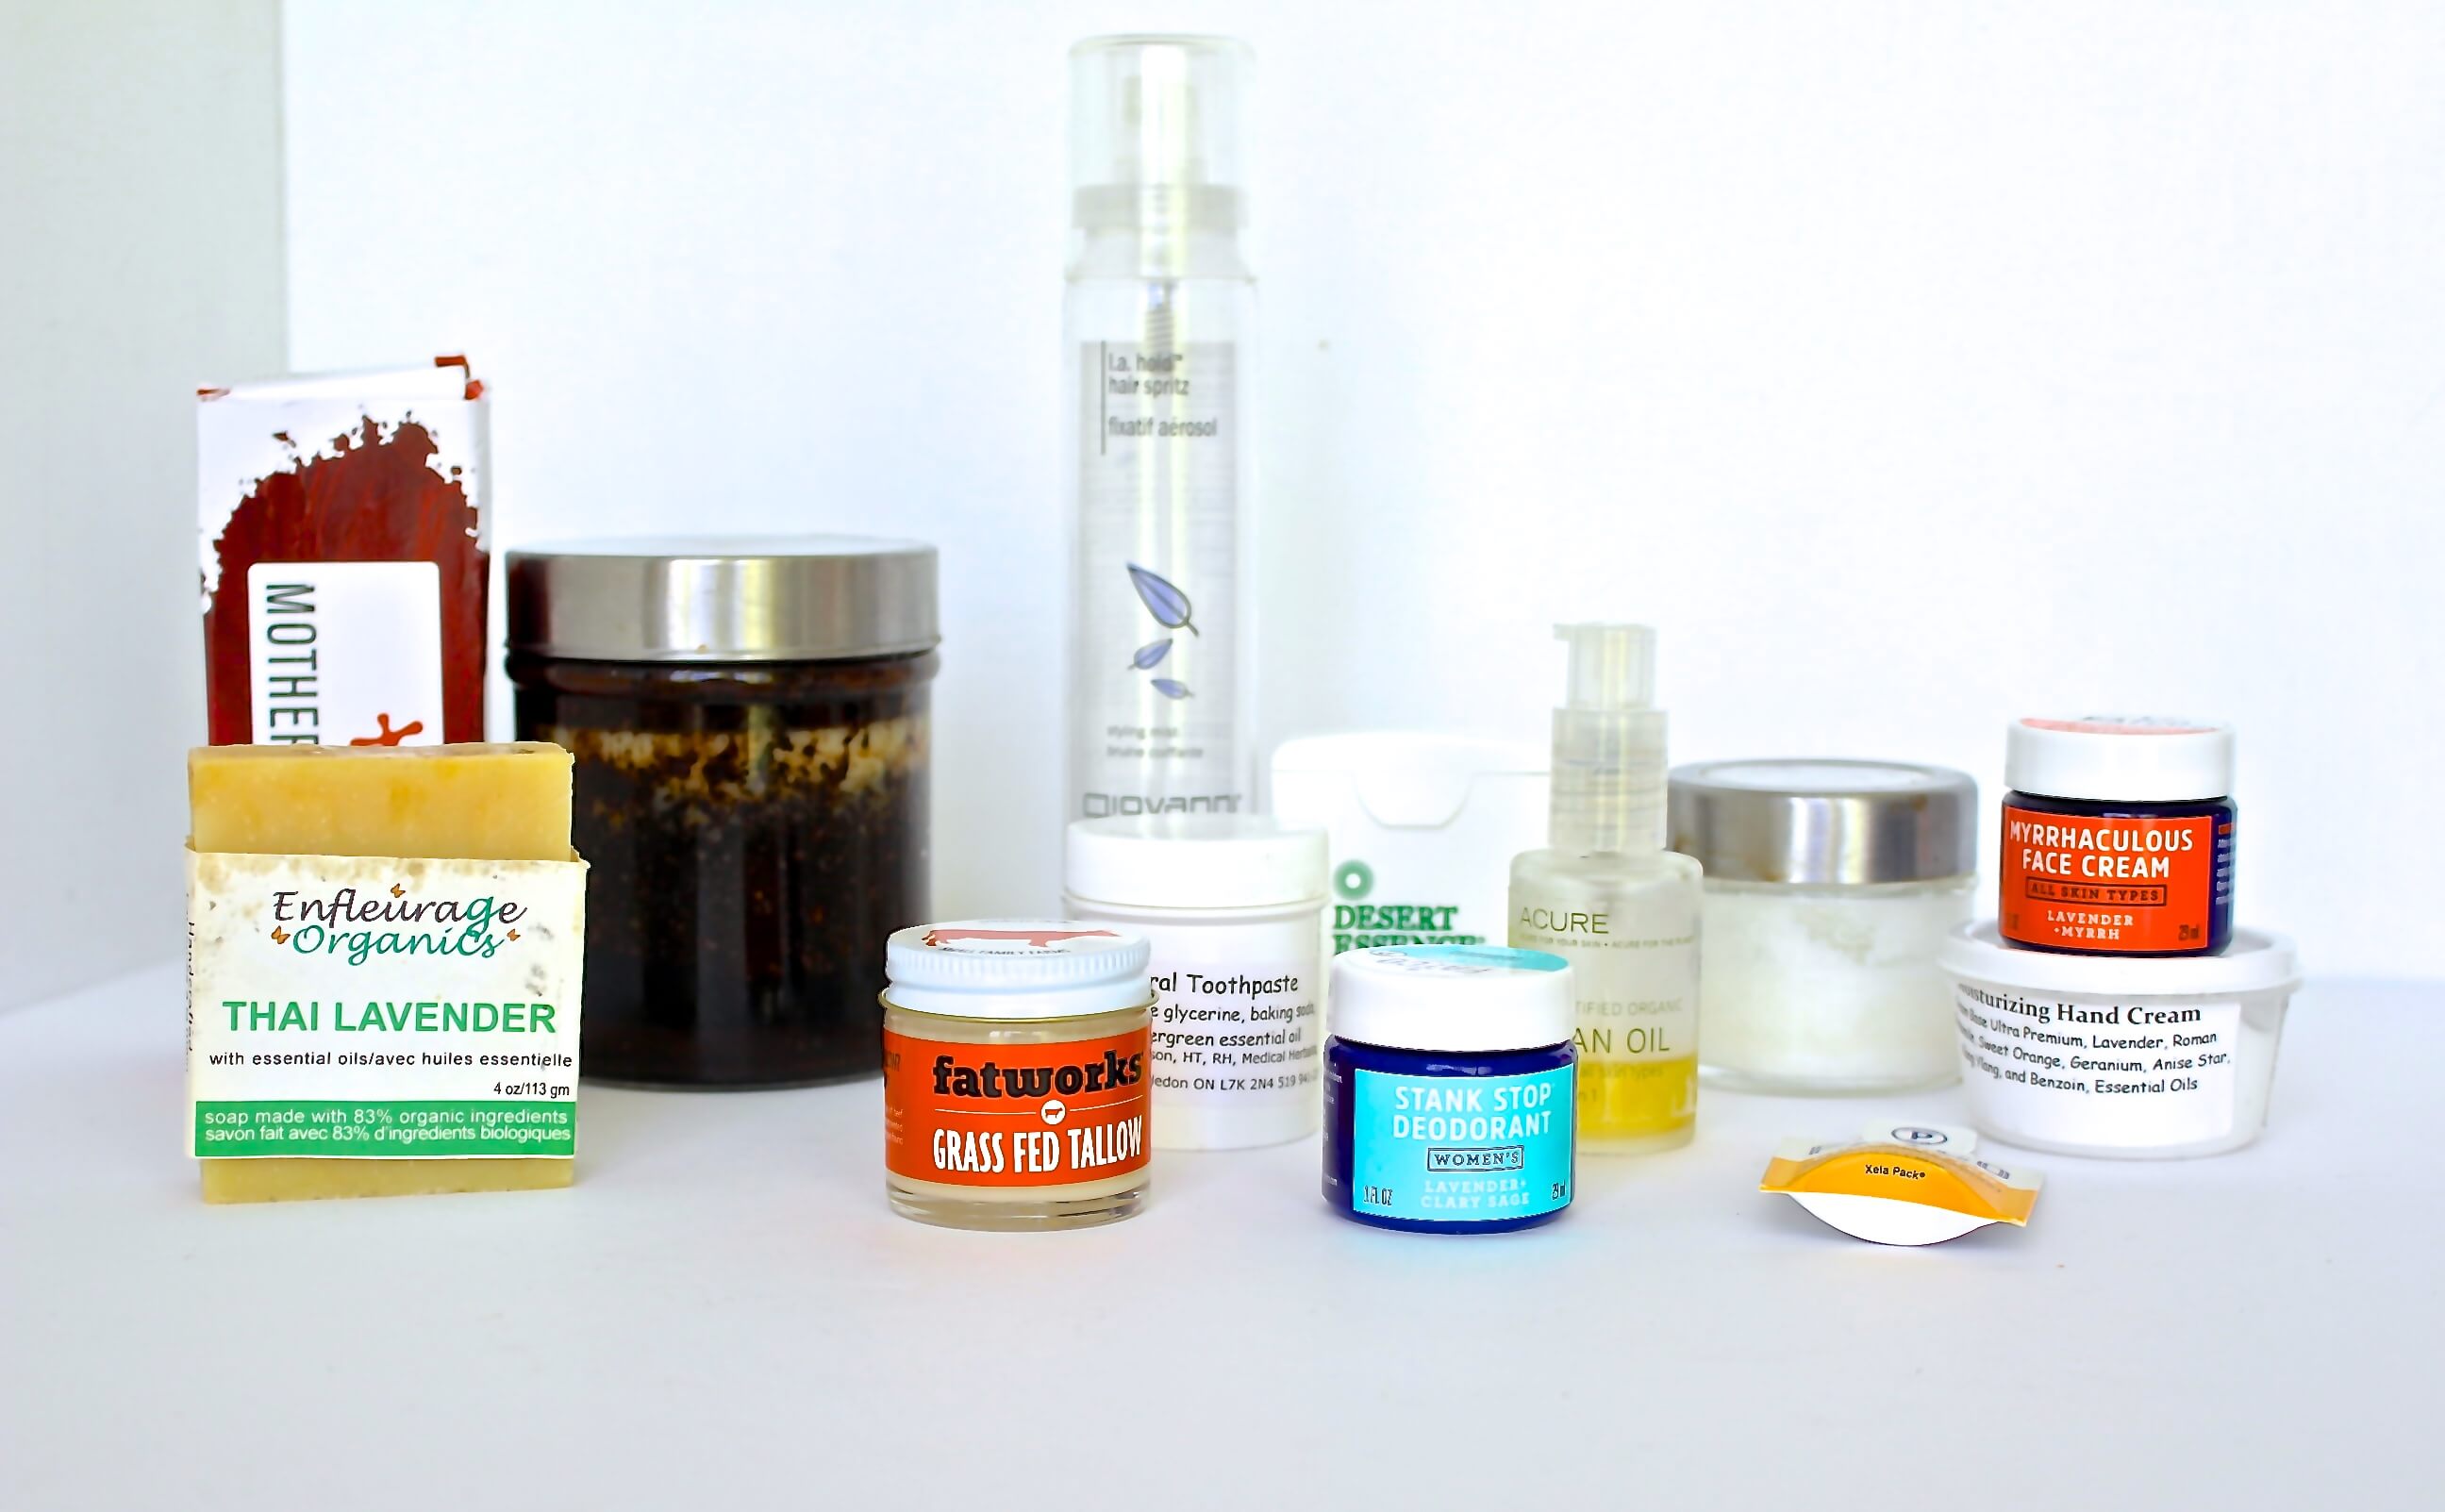 Options for natural skin care routine